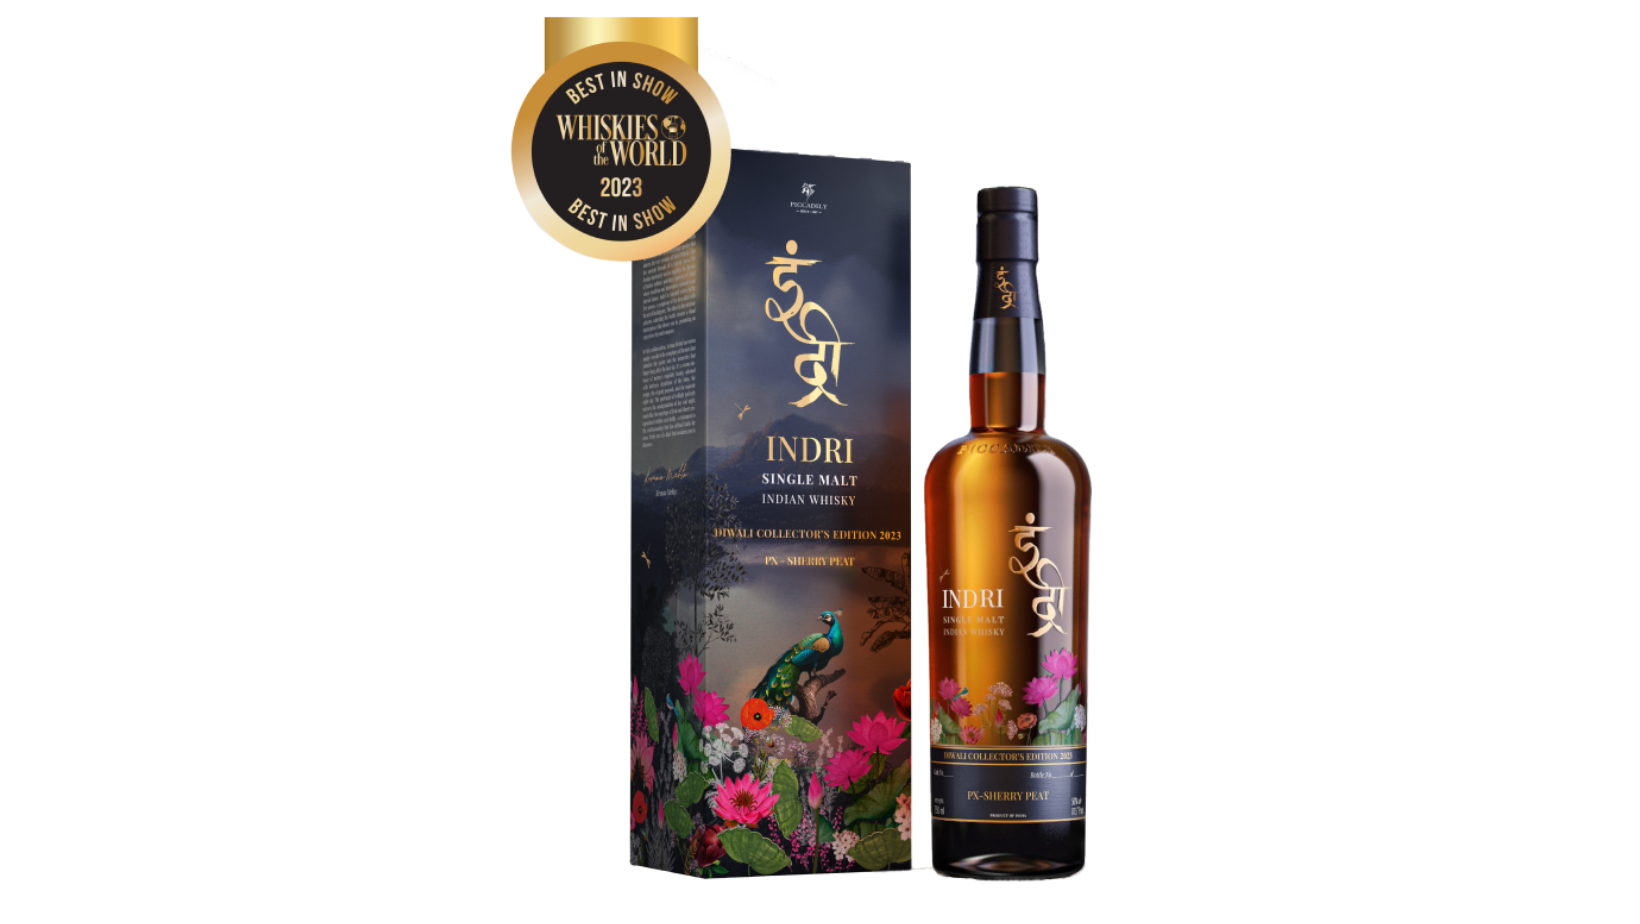 Indri Diwali Collector’s Edition 2023 Named World's Best Whisky at